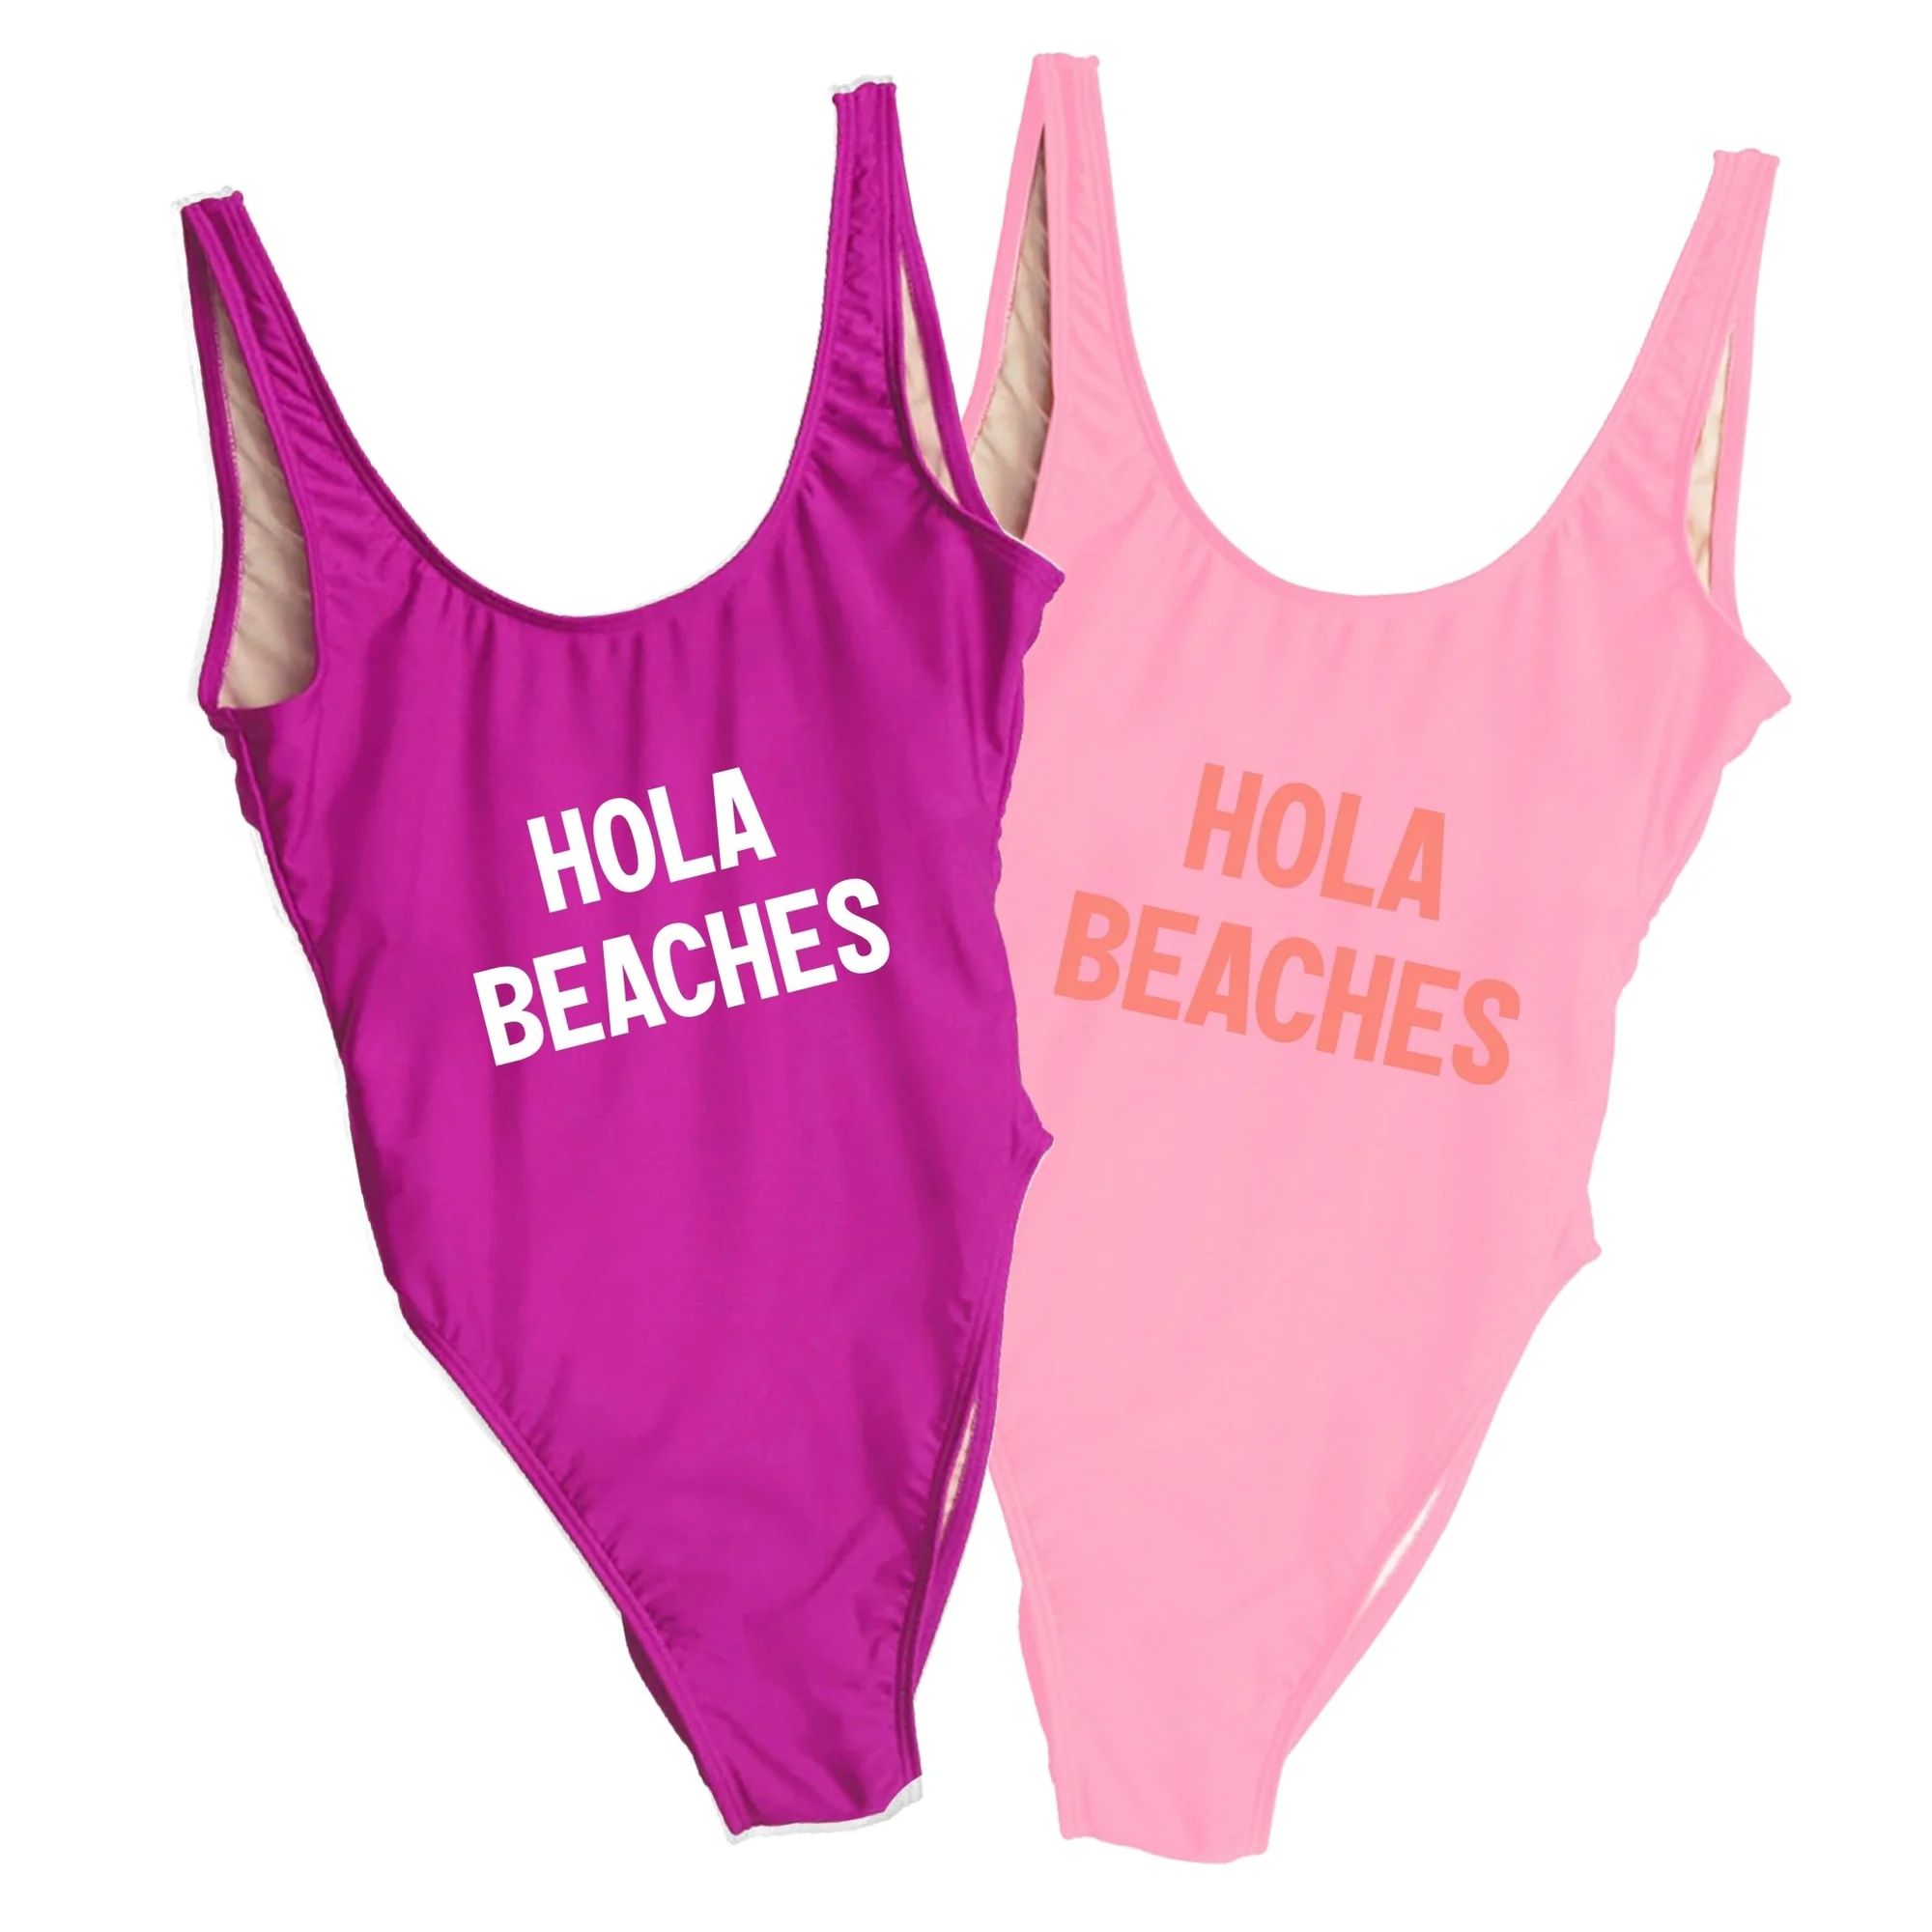 Hola Beaches Swimsuit | Sprinkled With Pink